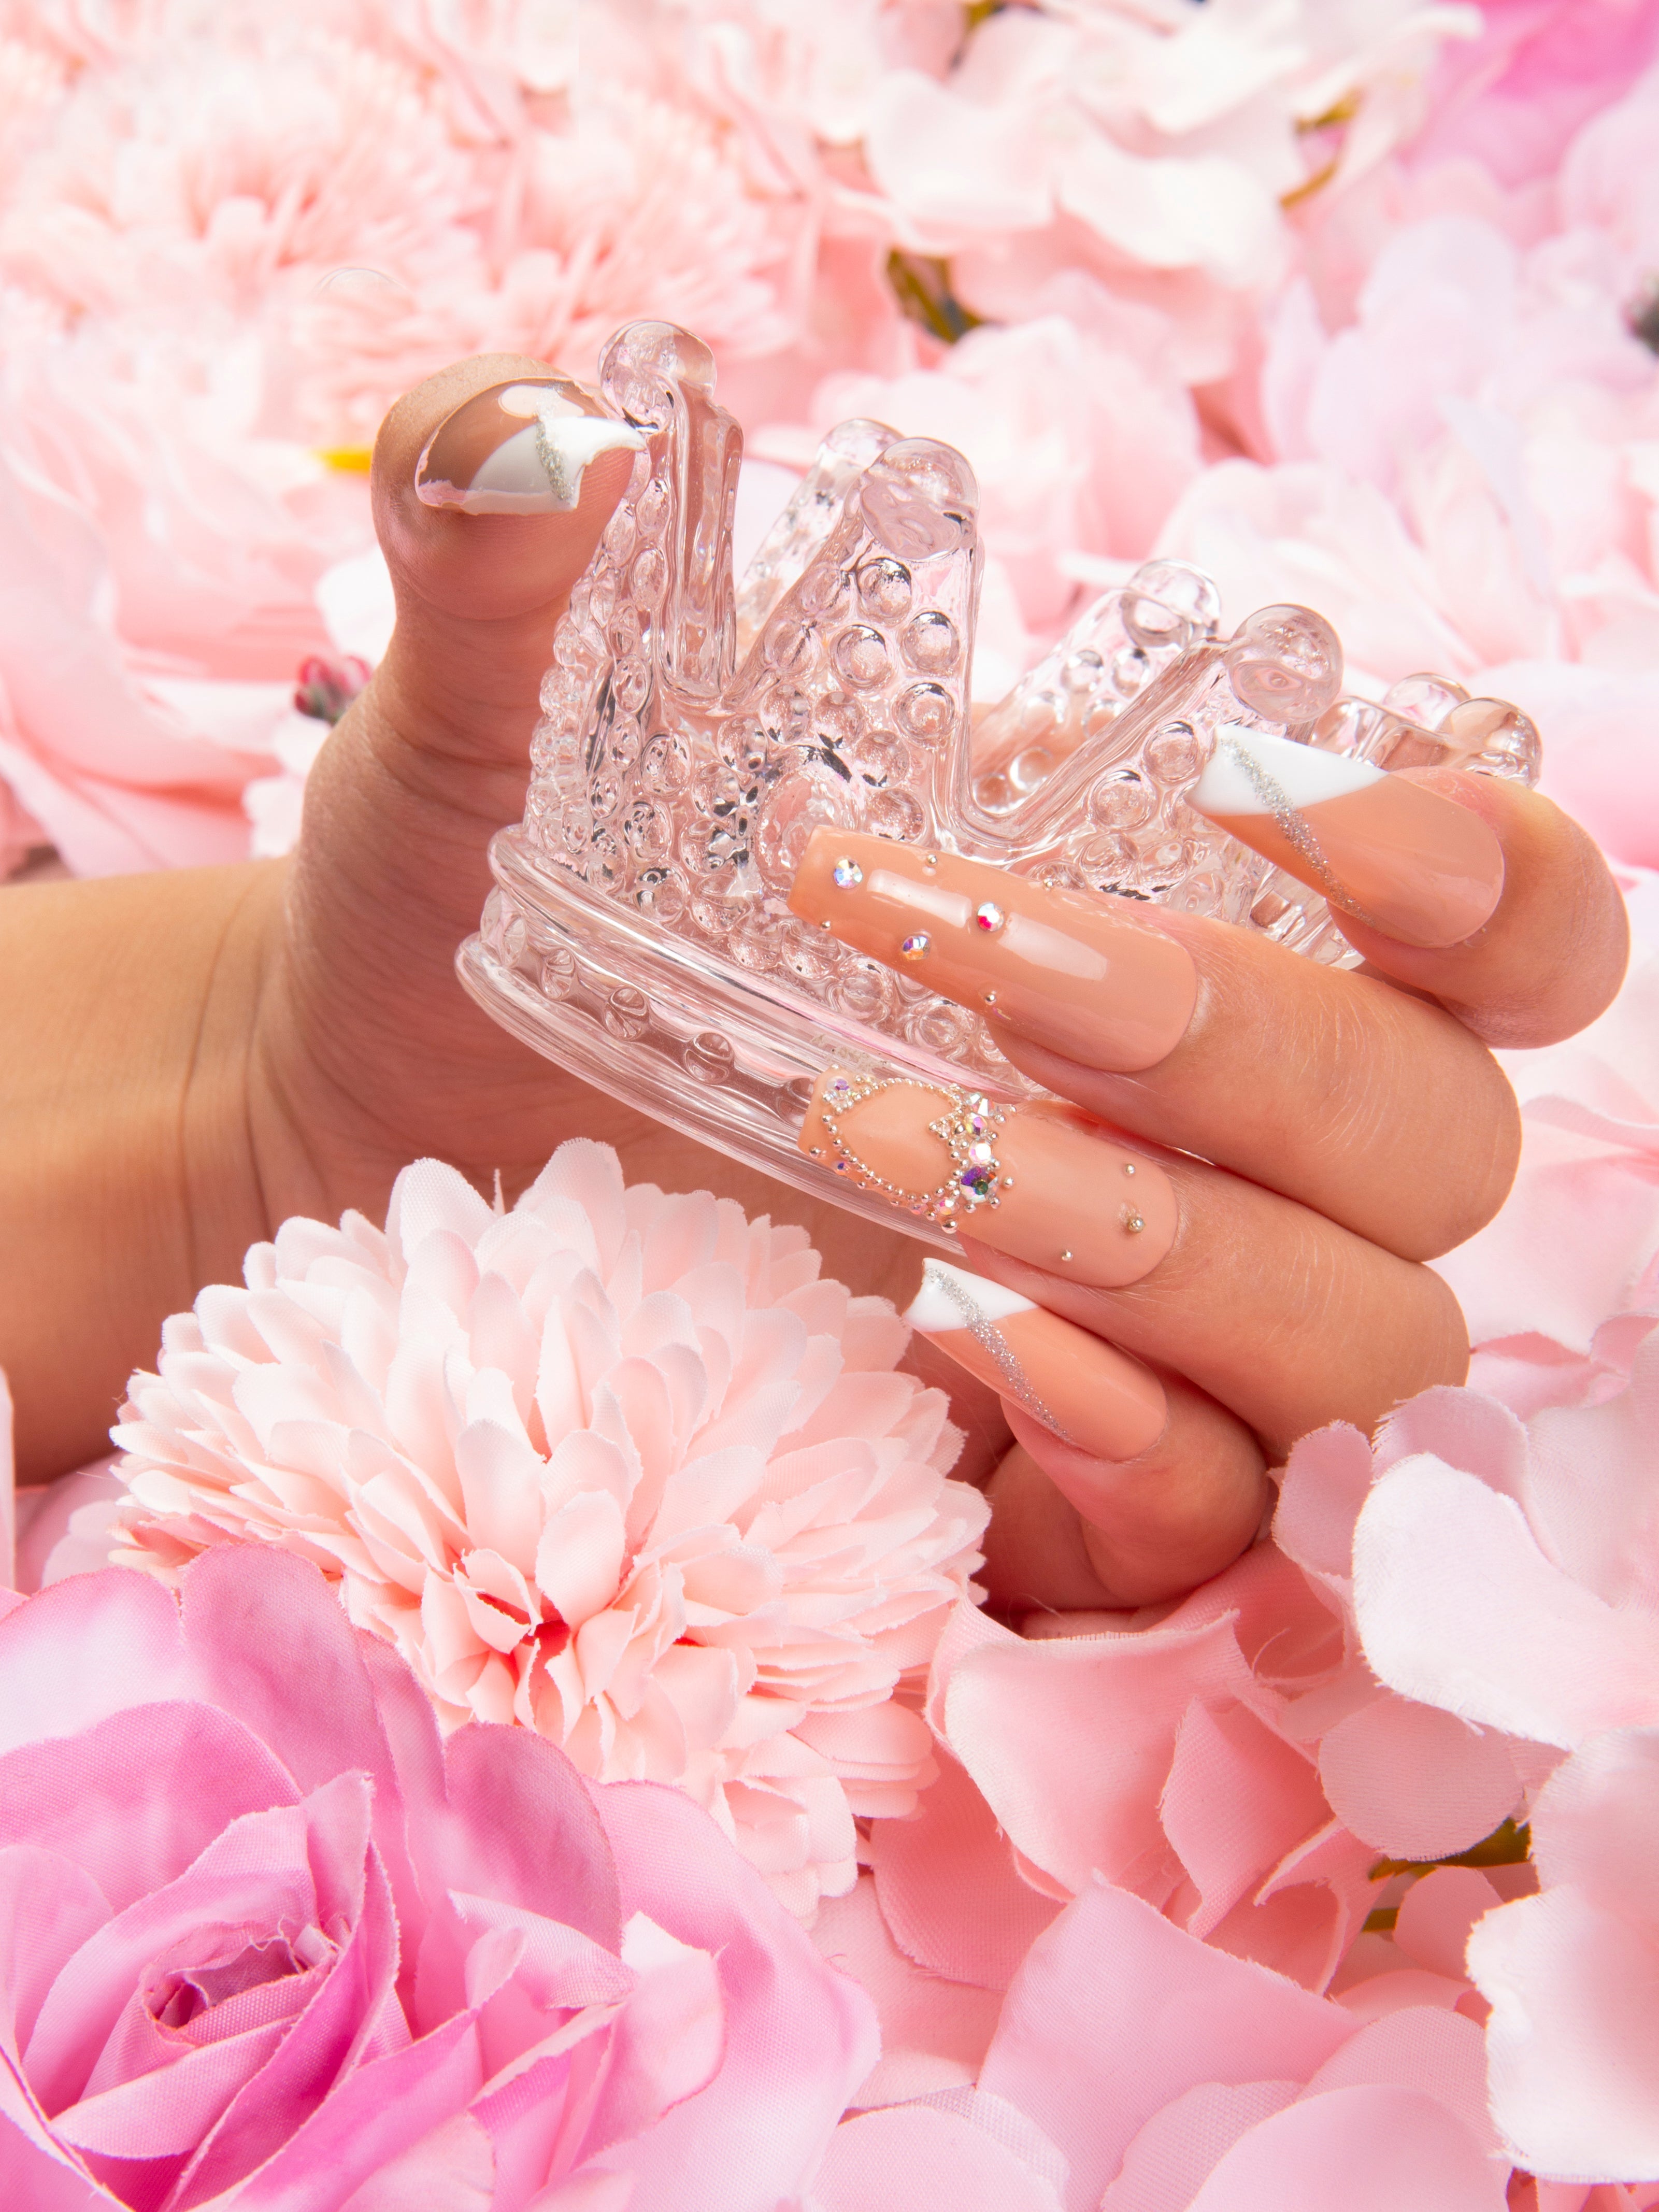 Hand displaying 'Lovely Kitten Heels' press-on nails with French tips and glitter accents, holding a clear acrylic crown amidst pink flowers. Lovful press-on acrylic nails.